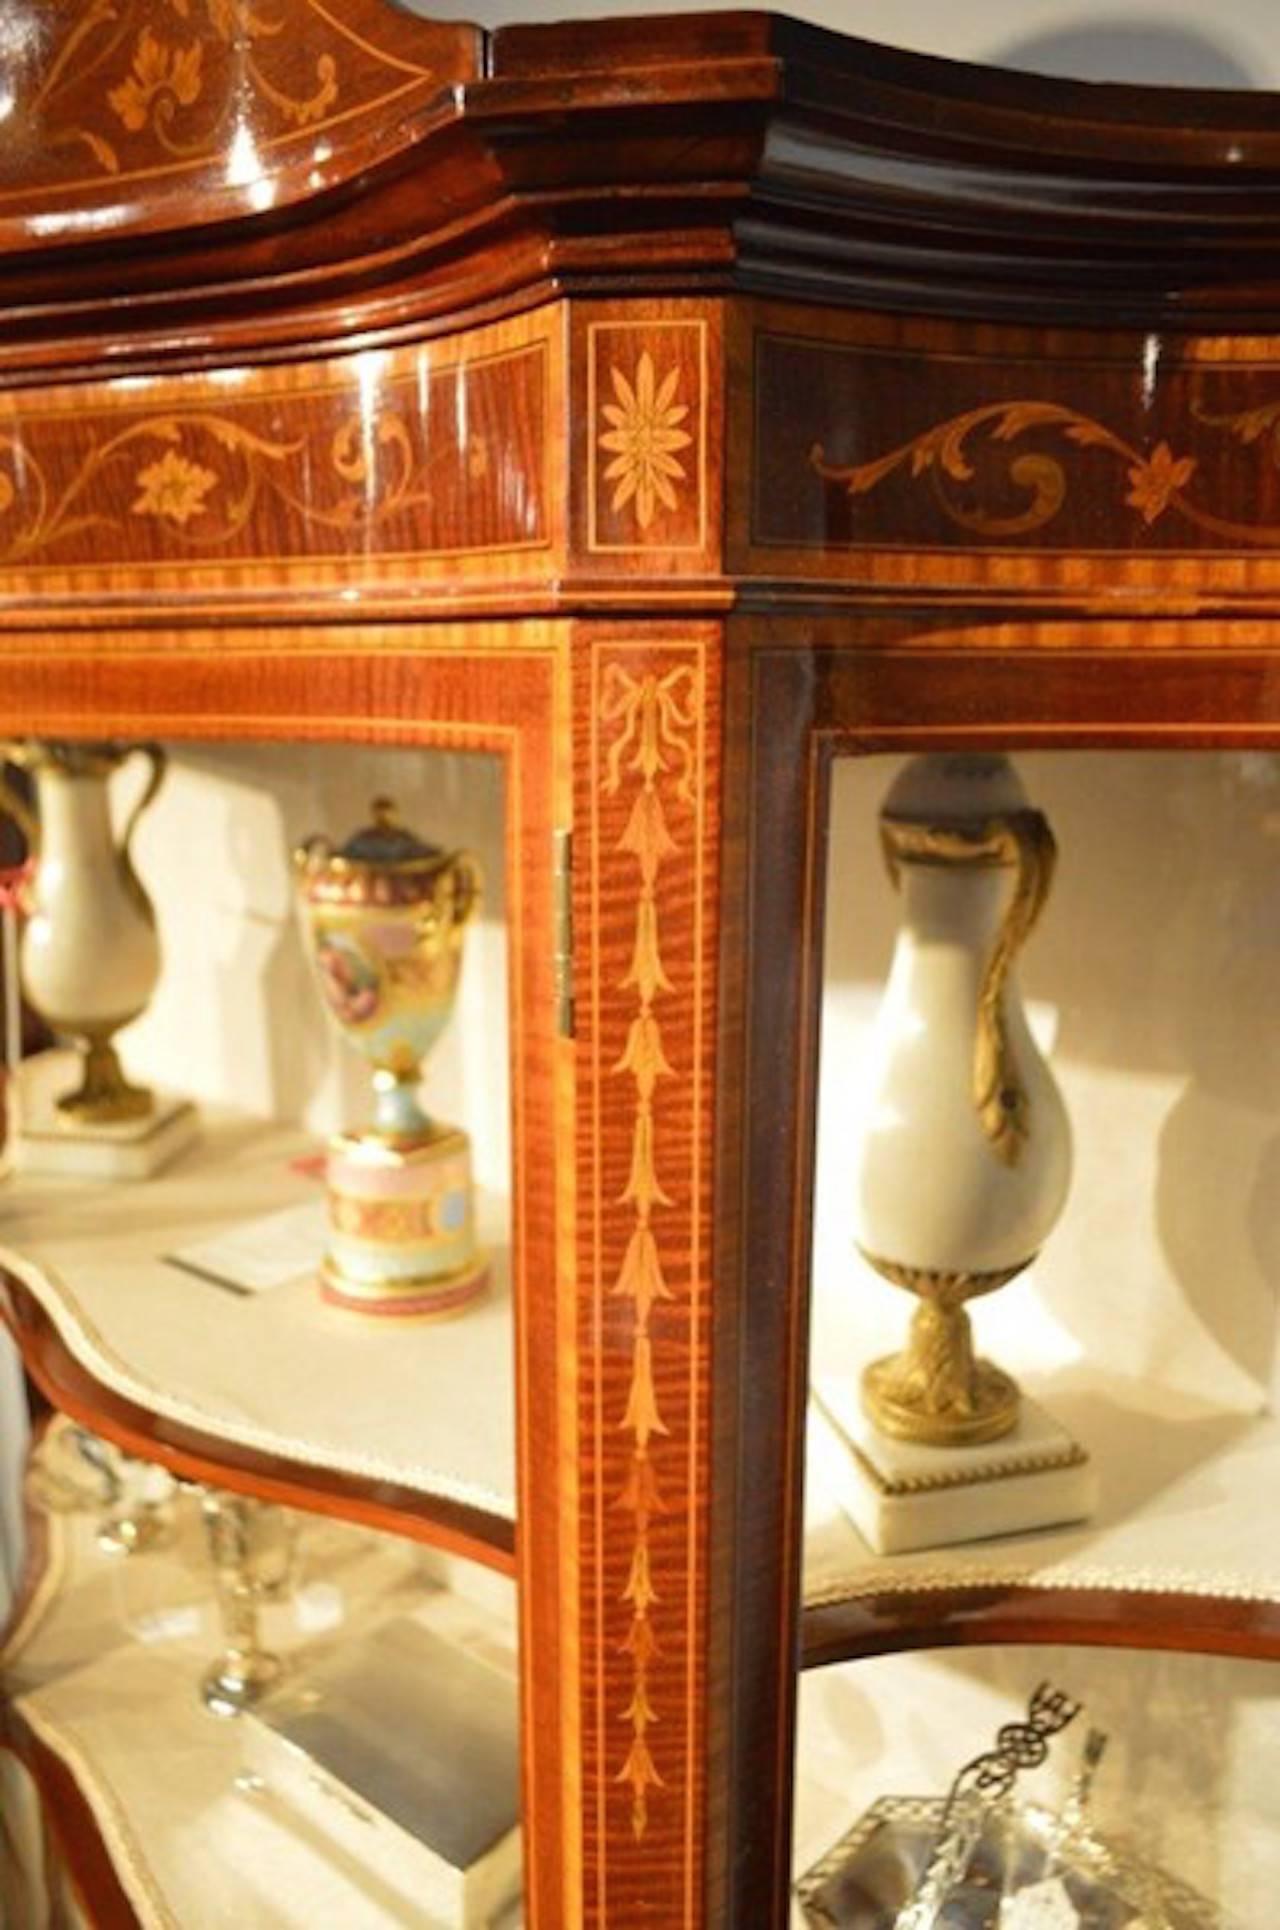 Early 20th Century Exhibition Quality Mahogany Inlaid Serpentine Display Cabinet by Maple & Co